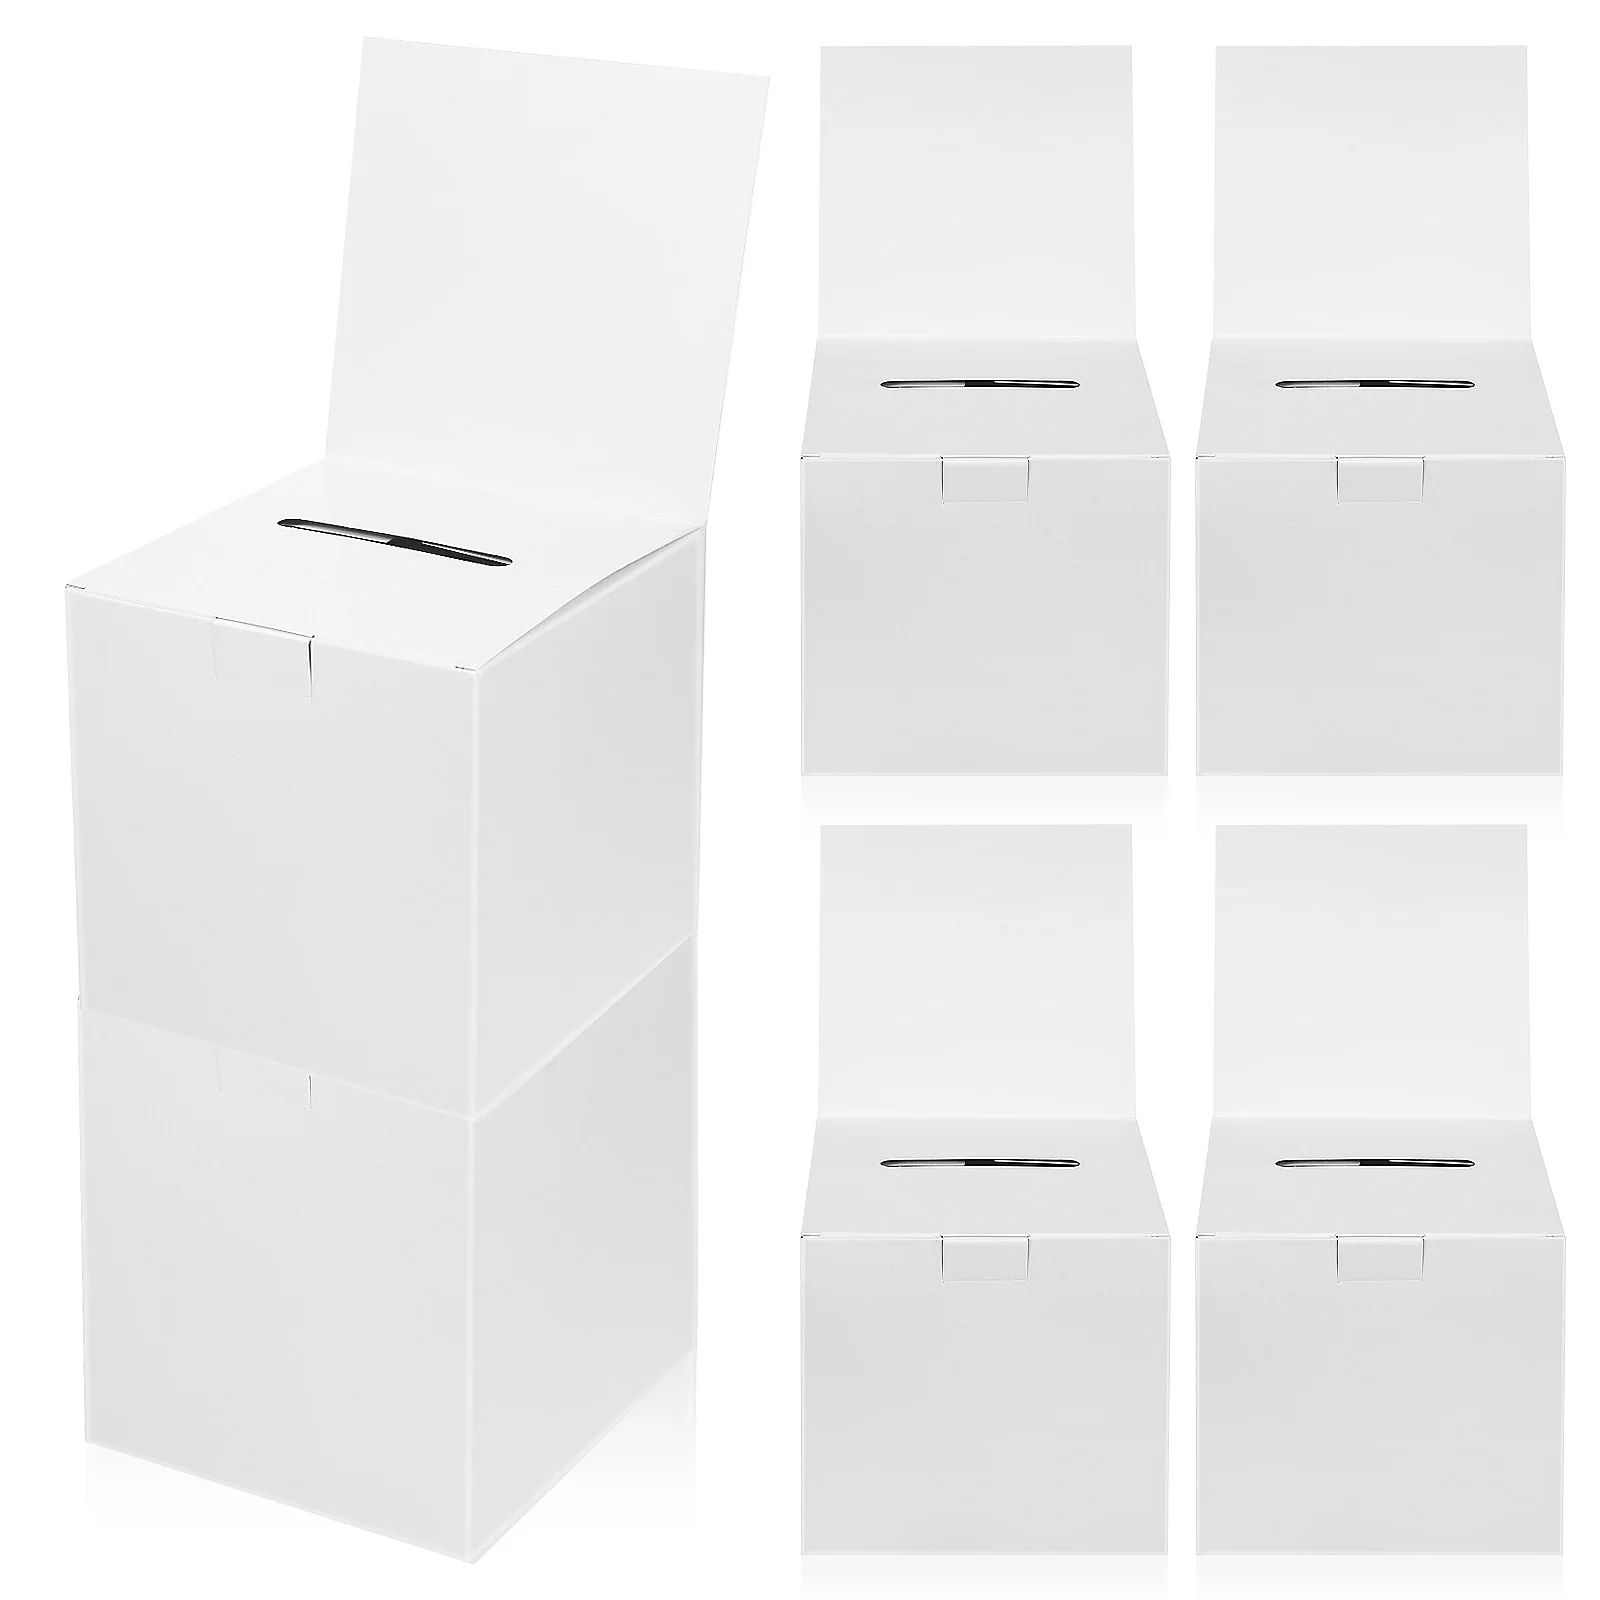 

Tip Jar With Slot Voting Boxes Tip Box Cardboard Boxes Storage Organizers Present Boxes Organizers Present Boxes